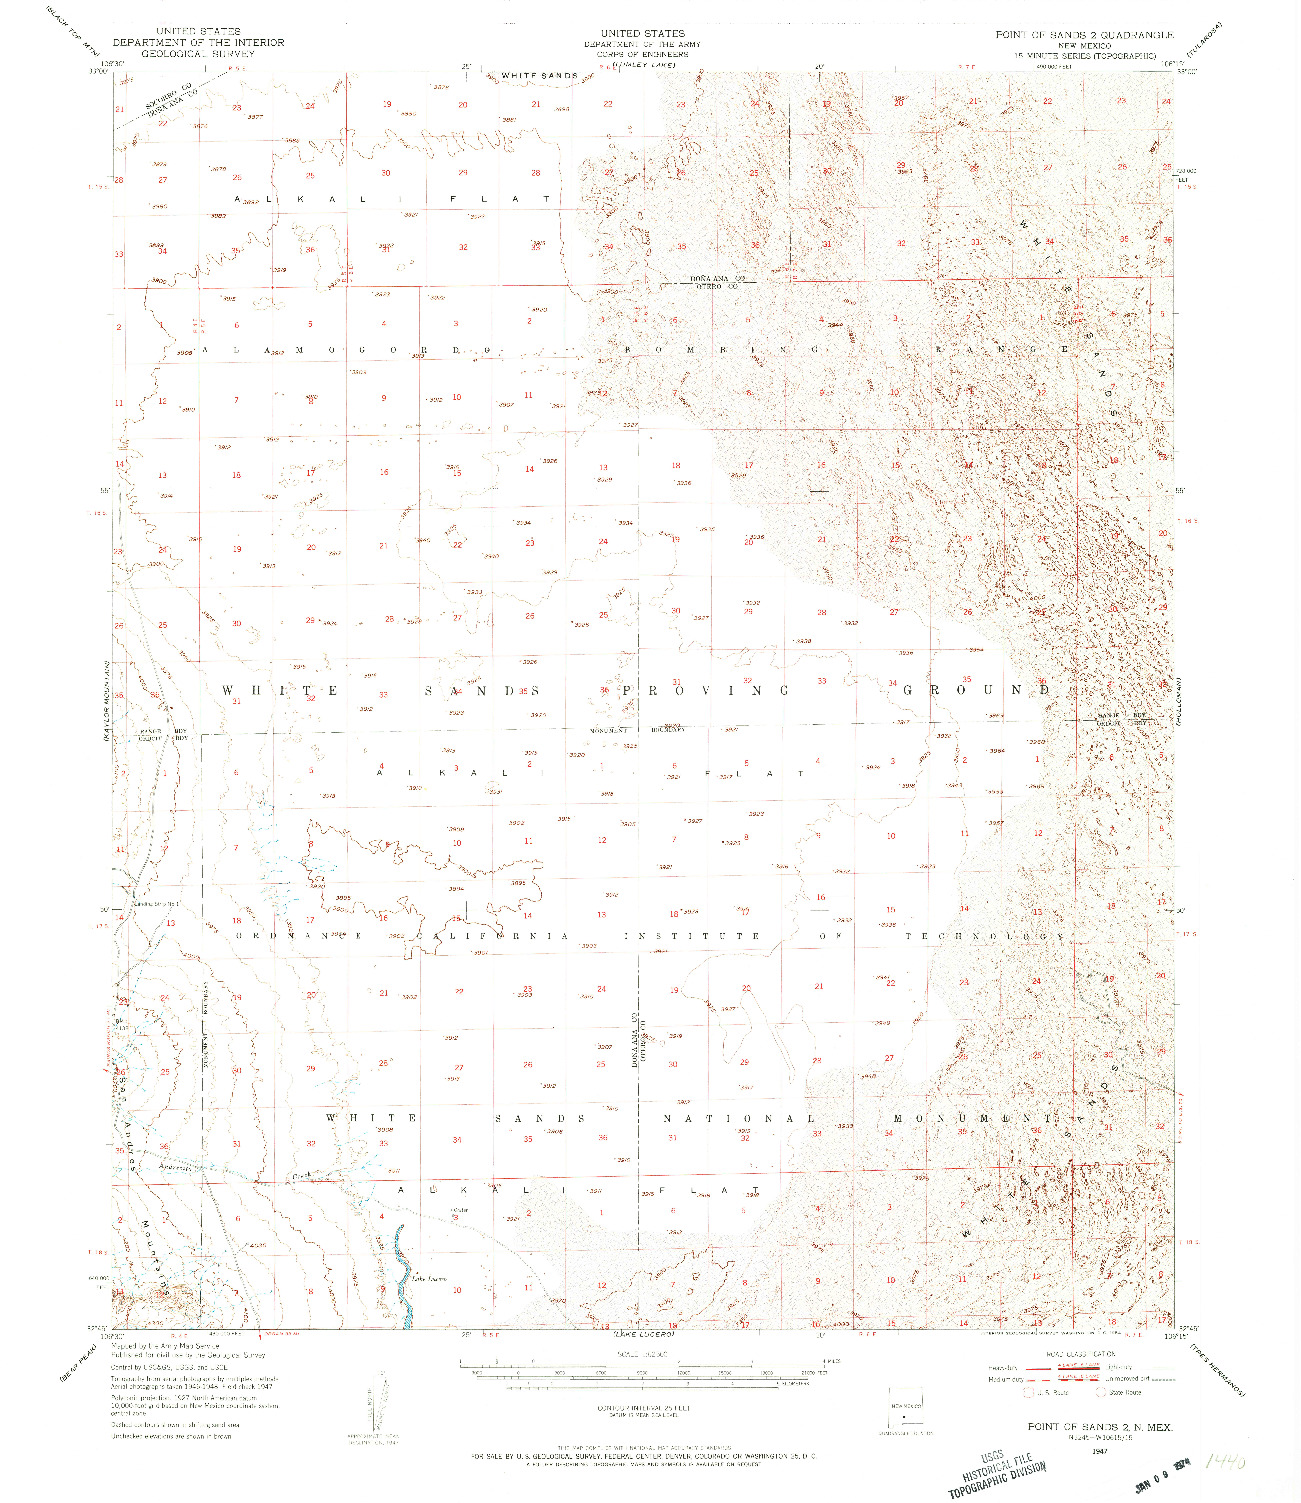 USGS 1:62500-SCALE QUADRANGLE FOR POINT OF SANDS 2, NM 1947